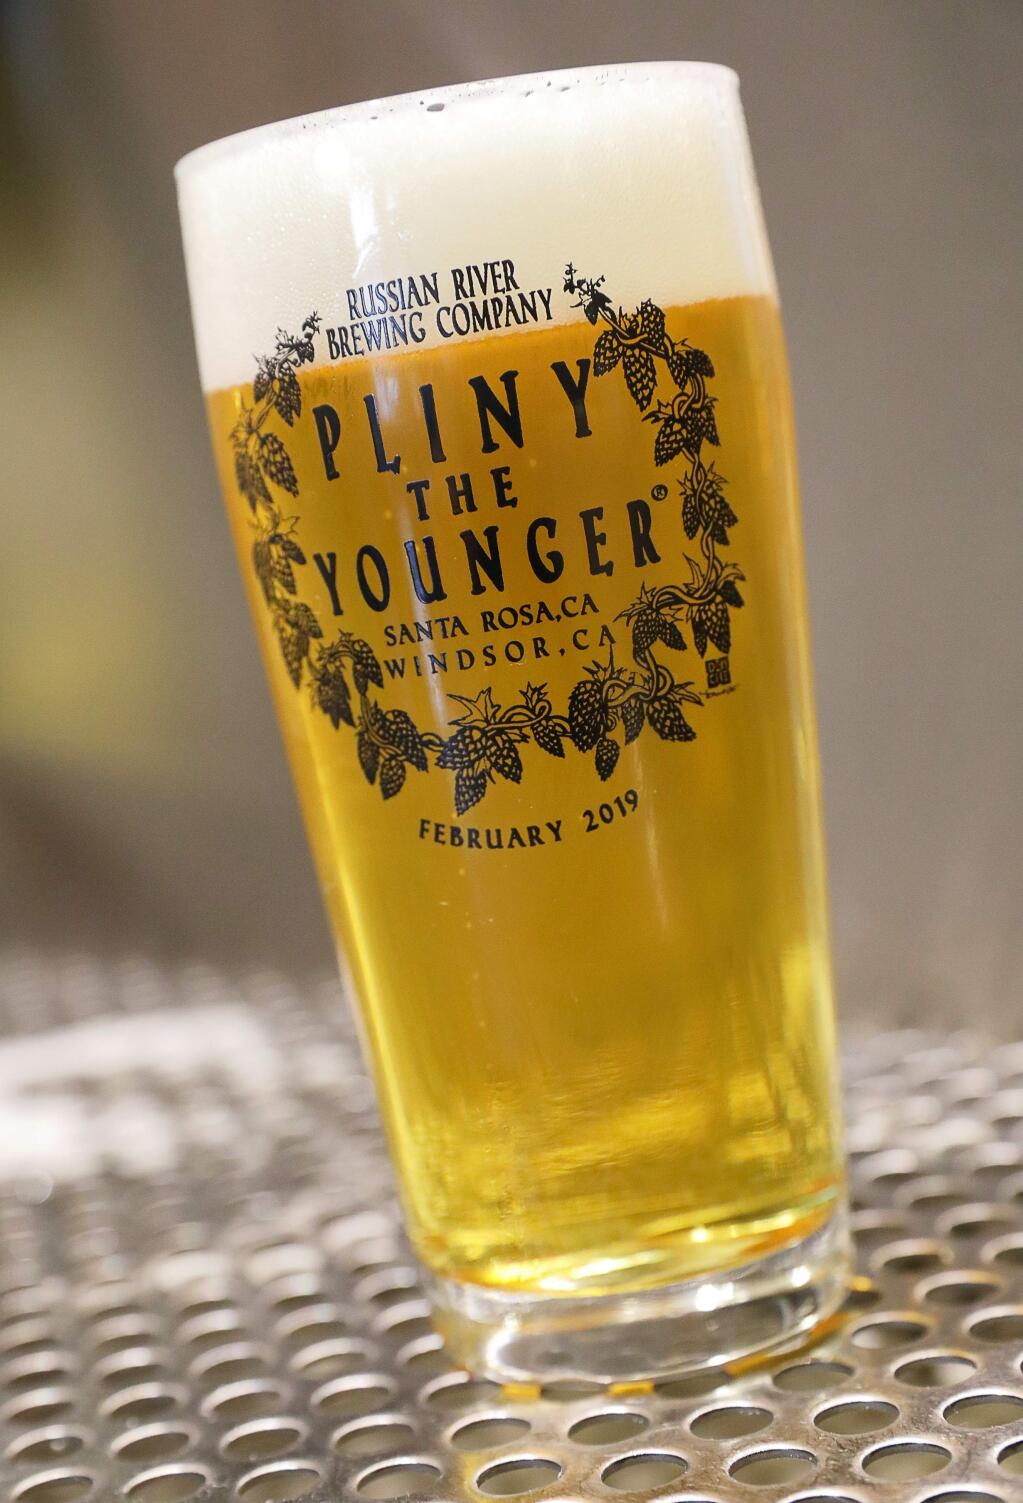 A souvenir glass commemorating this year's Pliny the Younger release. (Christopher Chung/ The Press Democrat)